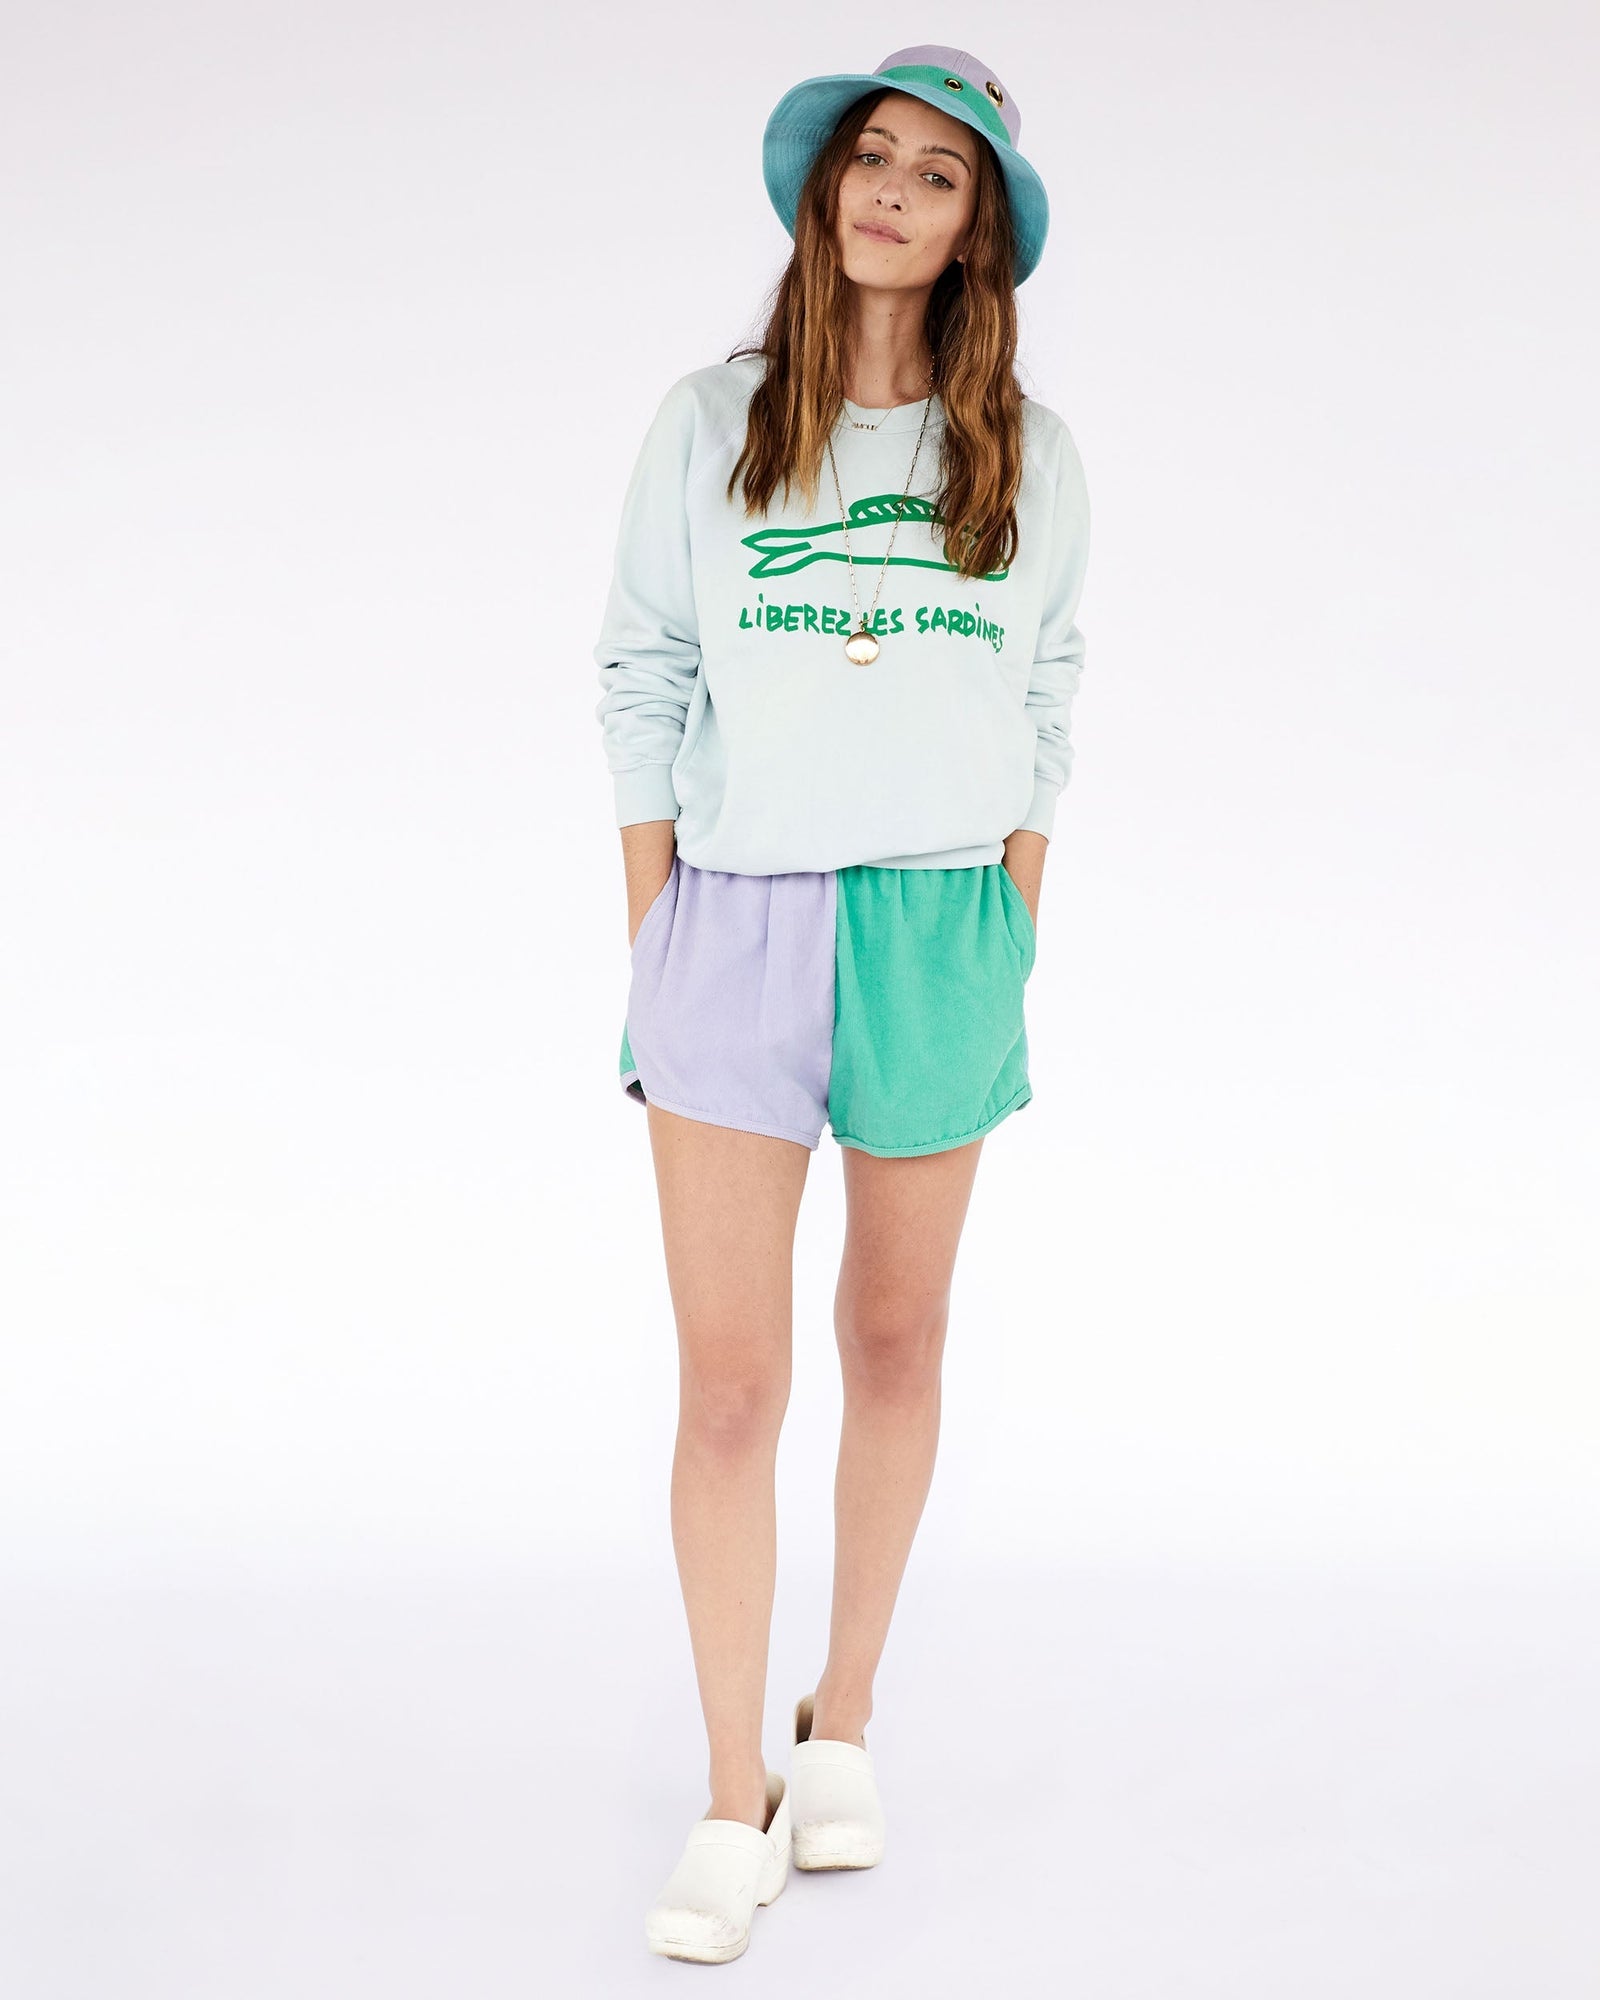 Shorts in Pale Blue, Mint & Lavender Pinwale Corduroy on Frannie